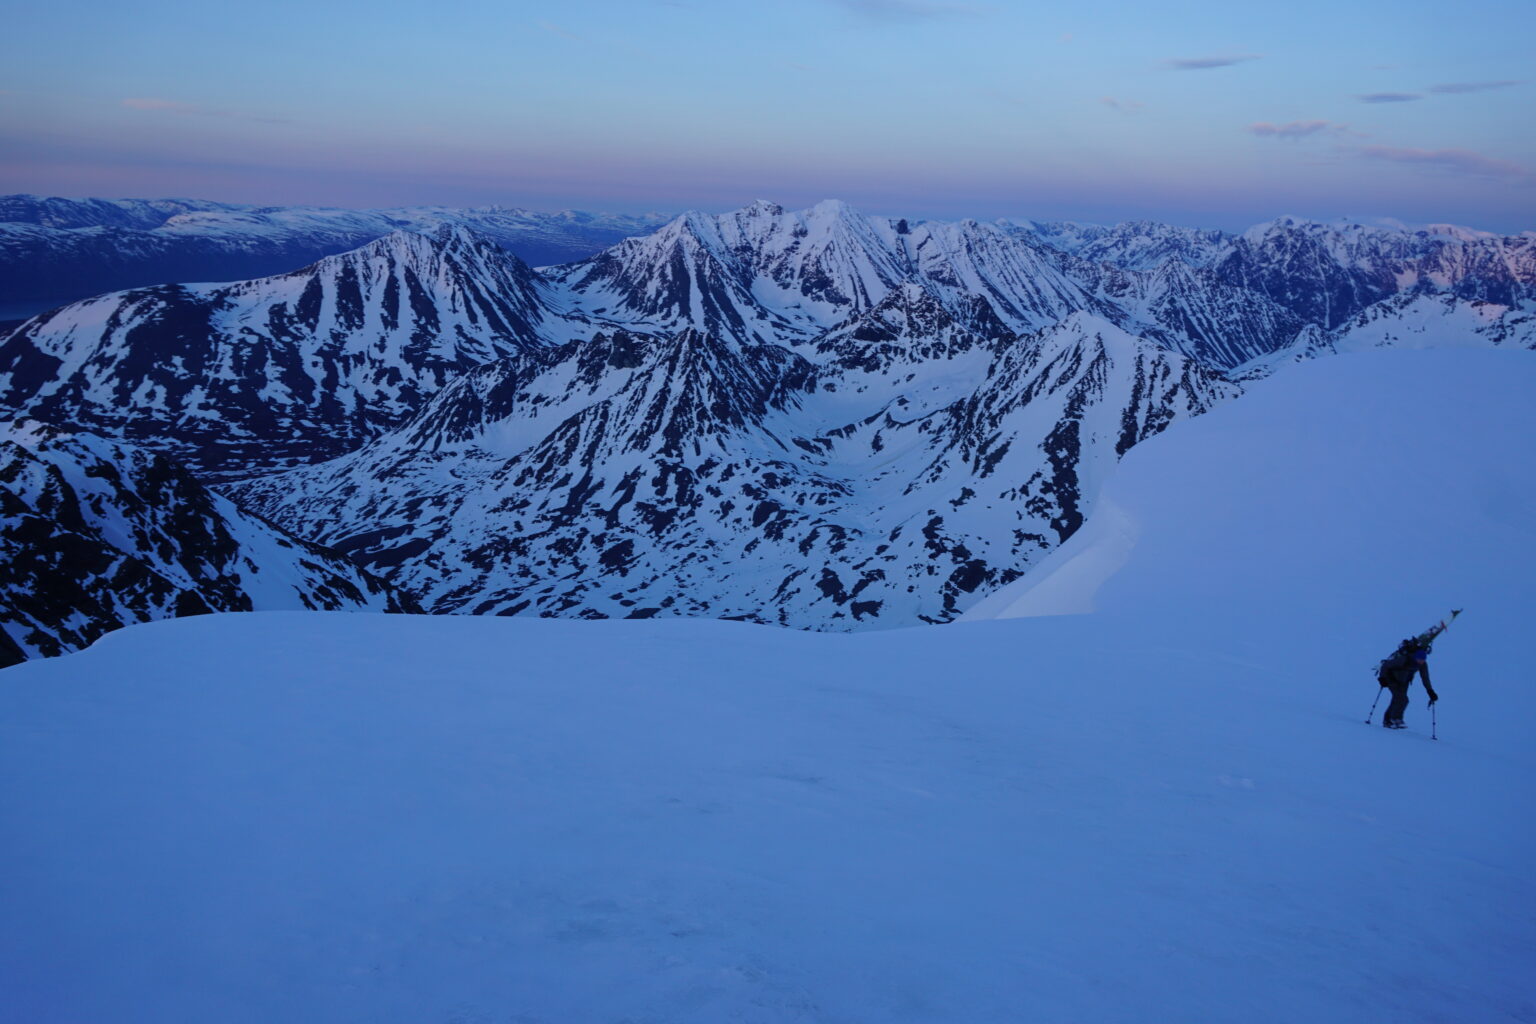 Climbing to the top of Tafeltinden at sunset with the Northern Lyngen Alps in the background